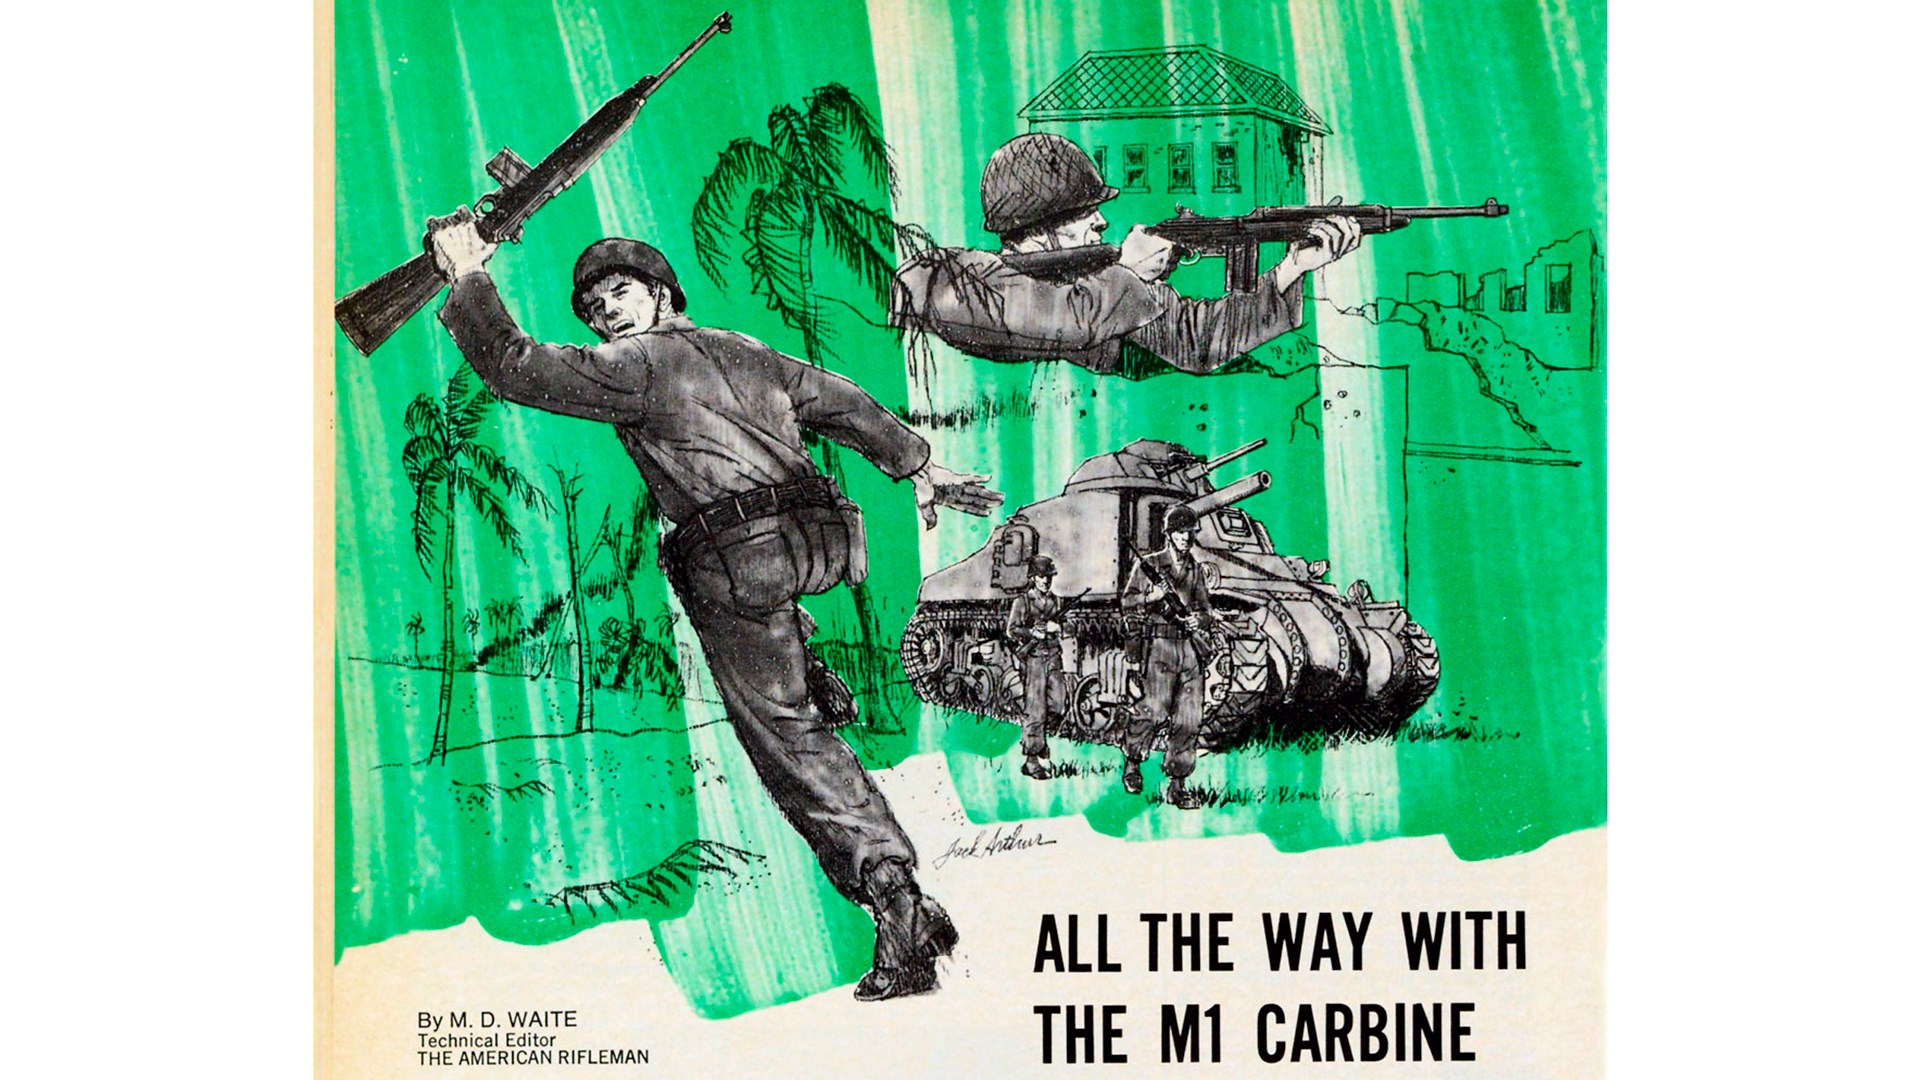 M1 Carbine artwork vintage text on image noting ALL THE WAY WITH THE M1 CARBINE